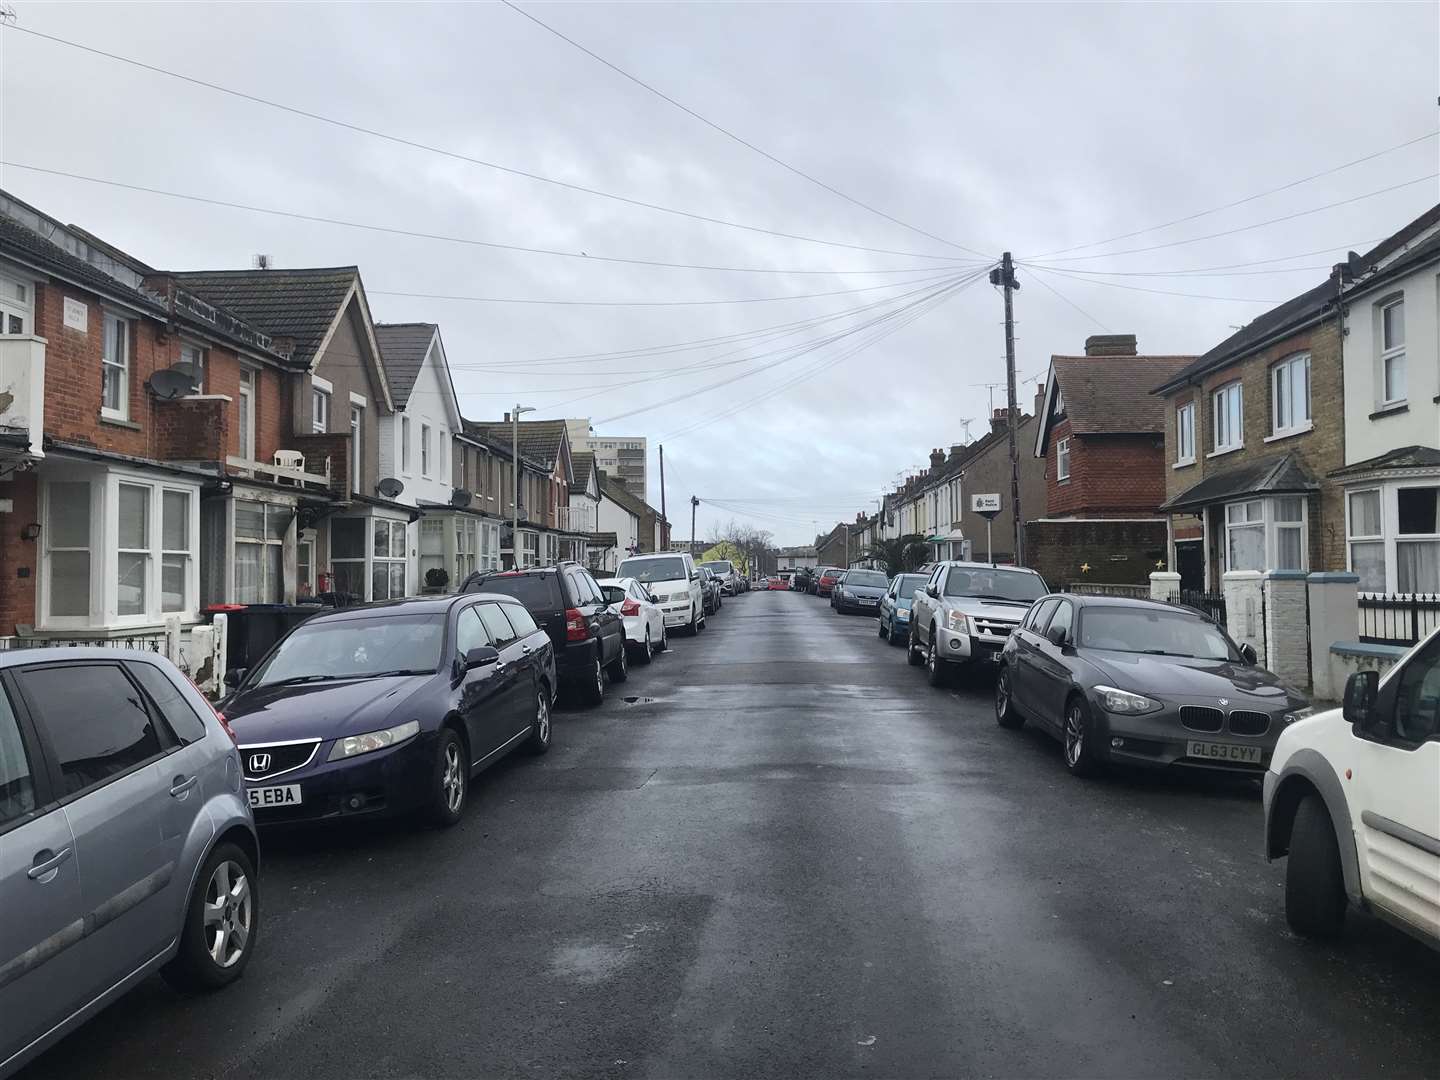 Residents have said parking has always been a "nightmare" in Gordon Road